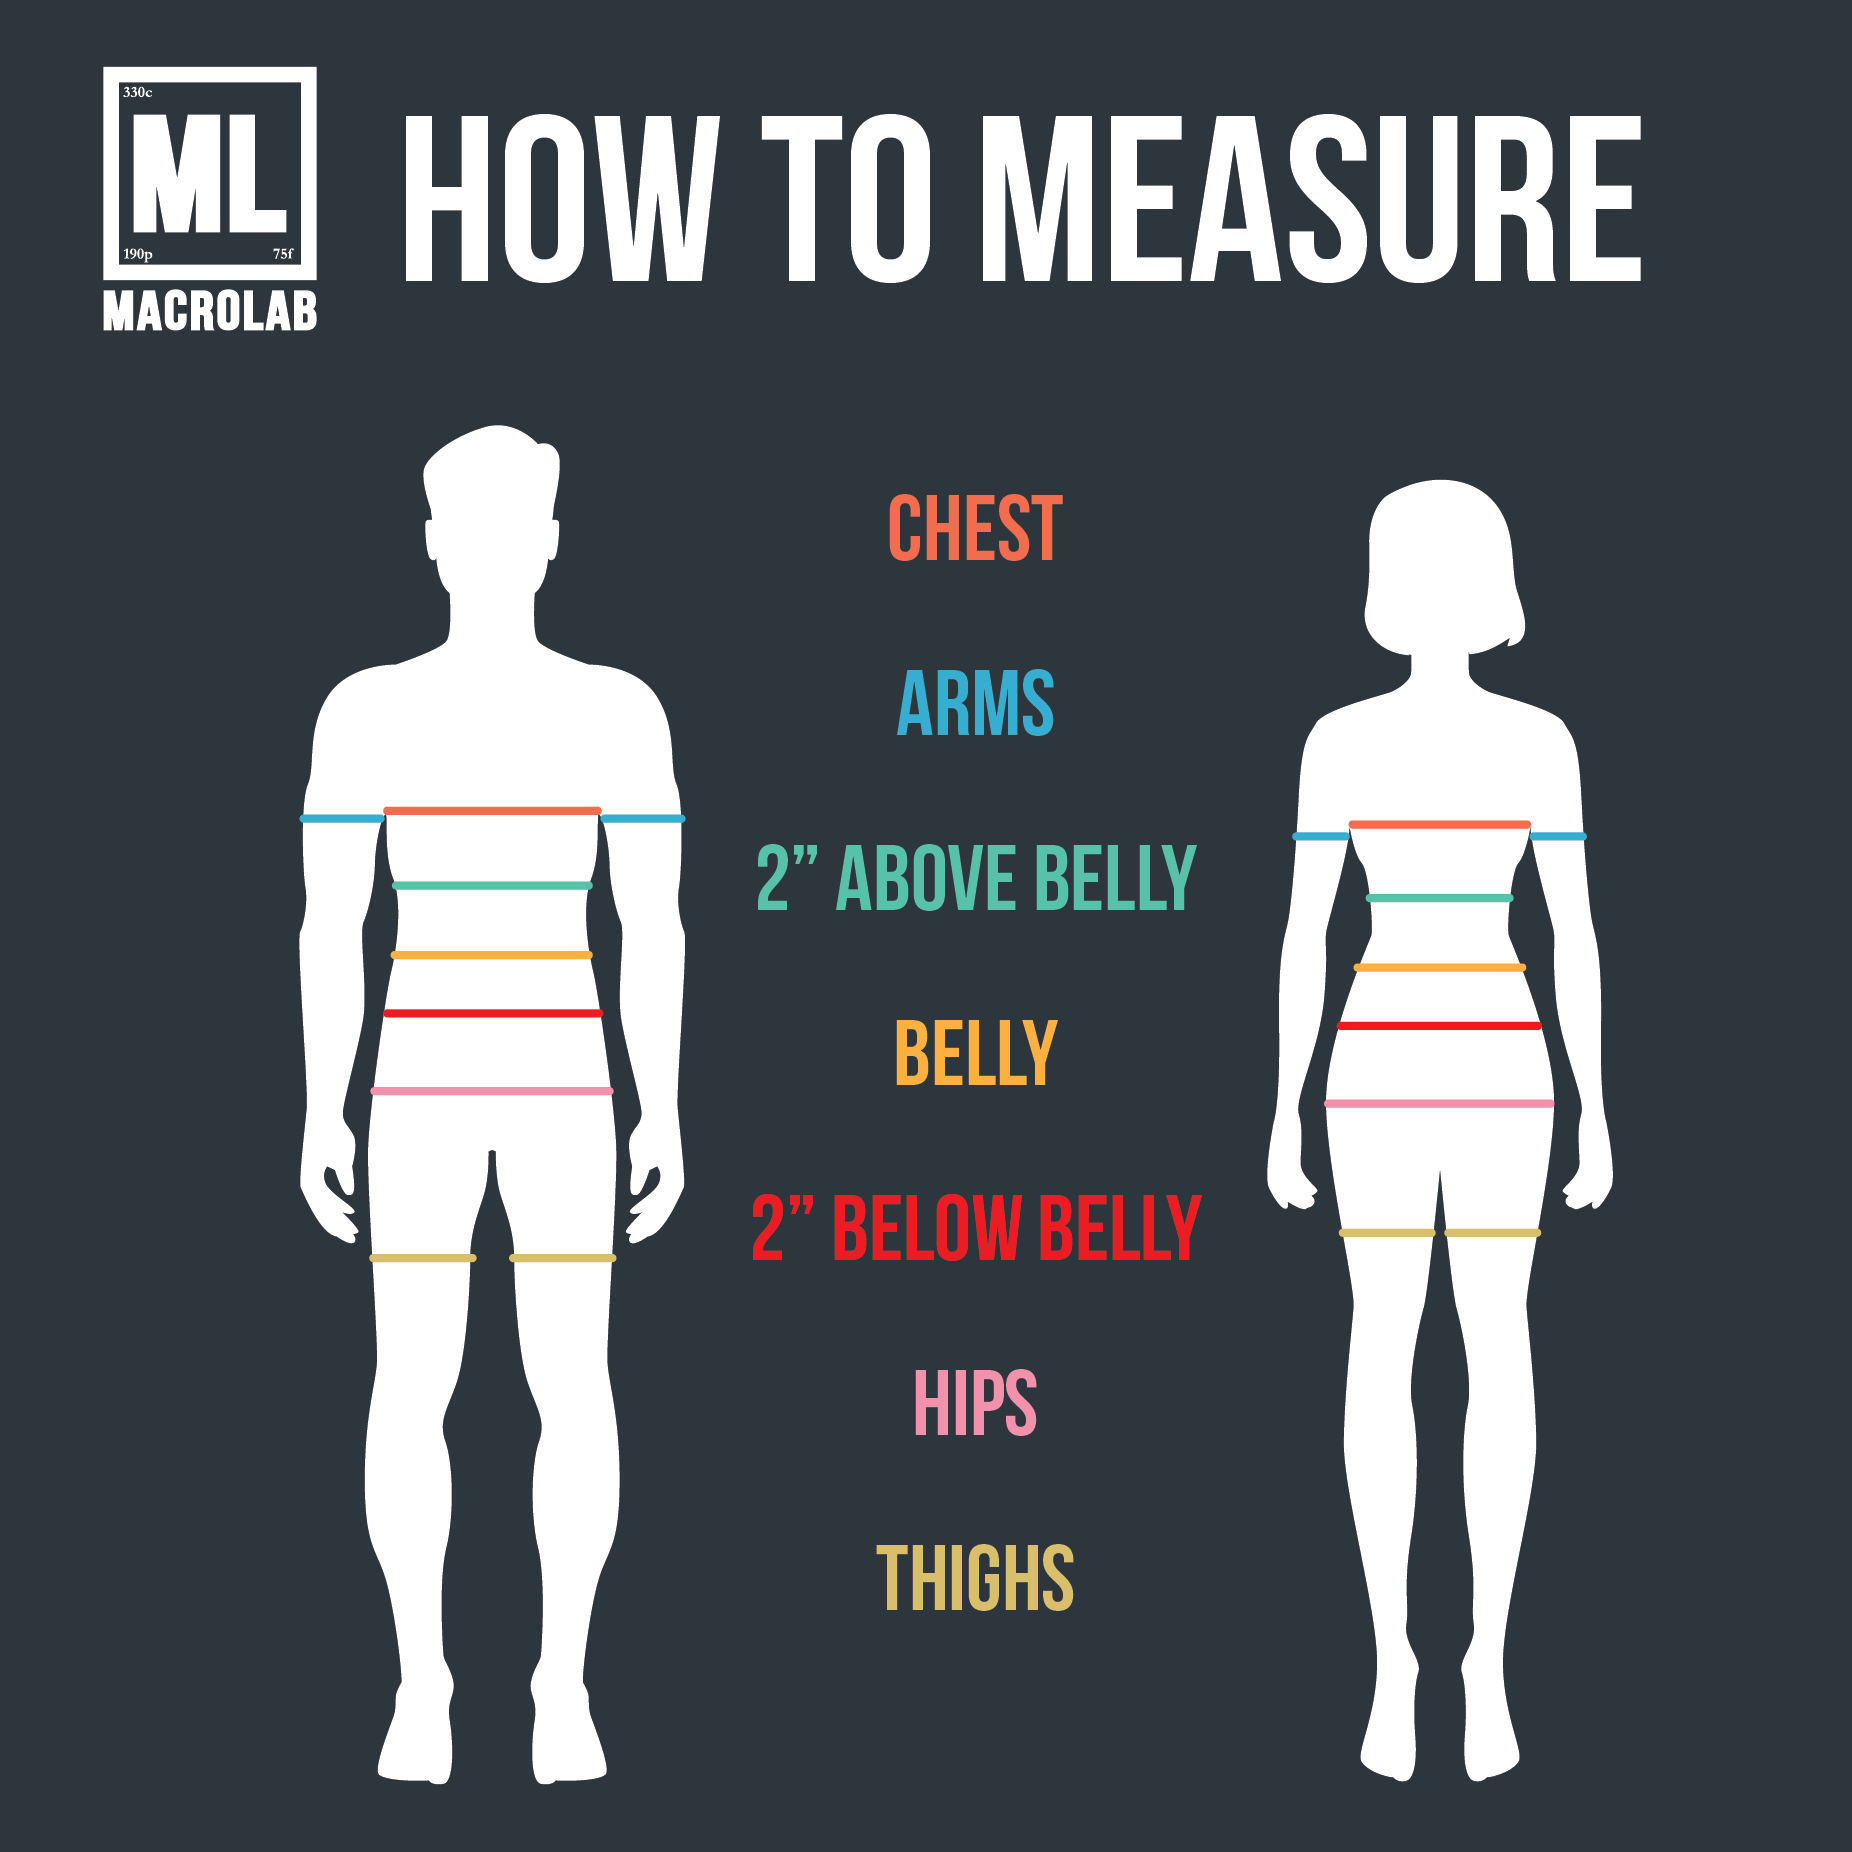 What is the Most Accurate Way to Measure and Track Body